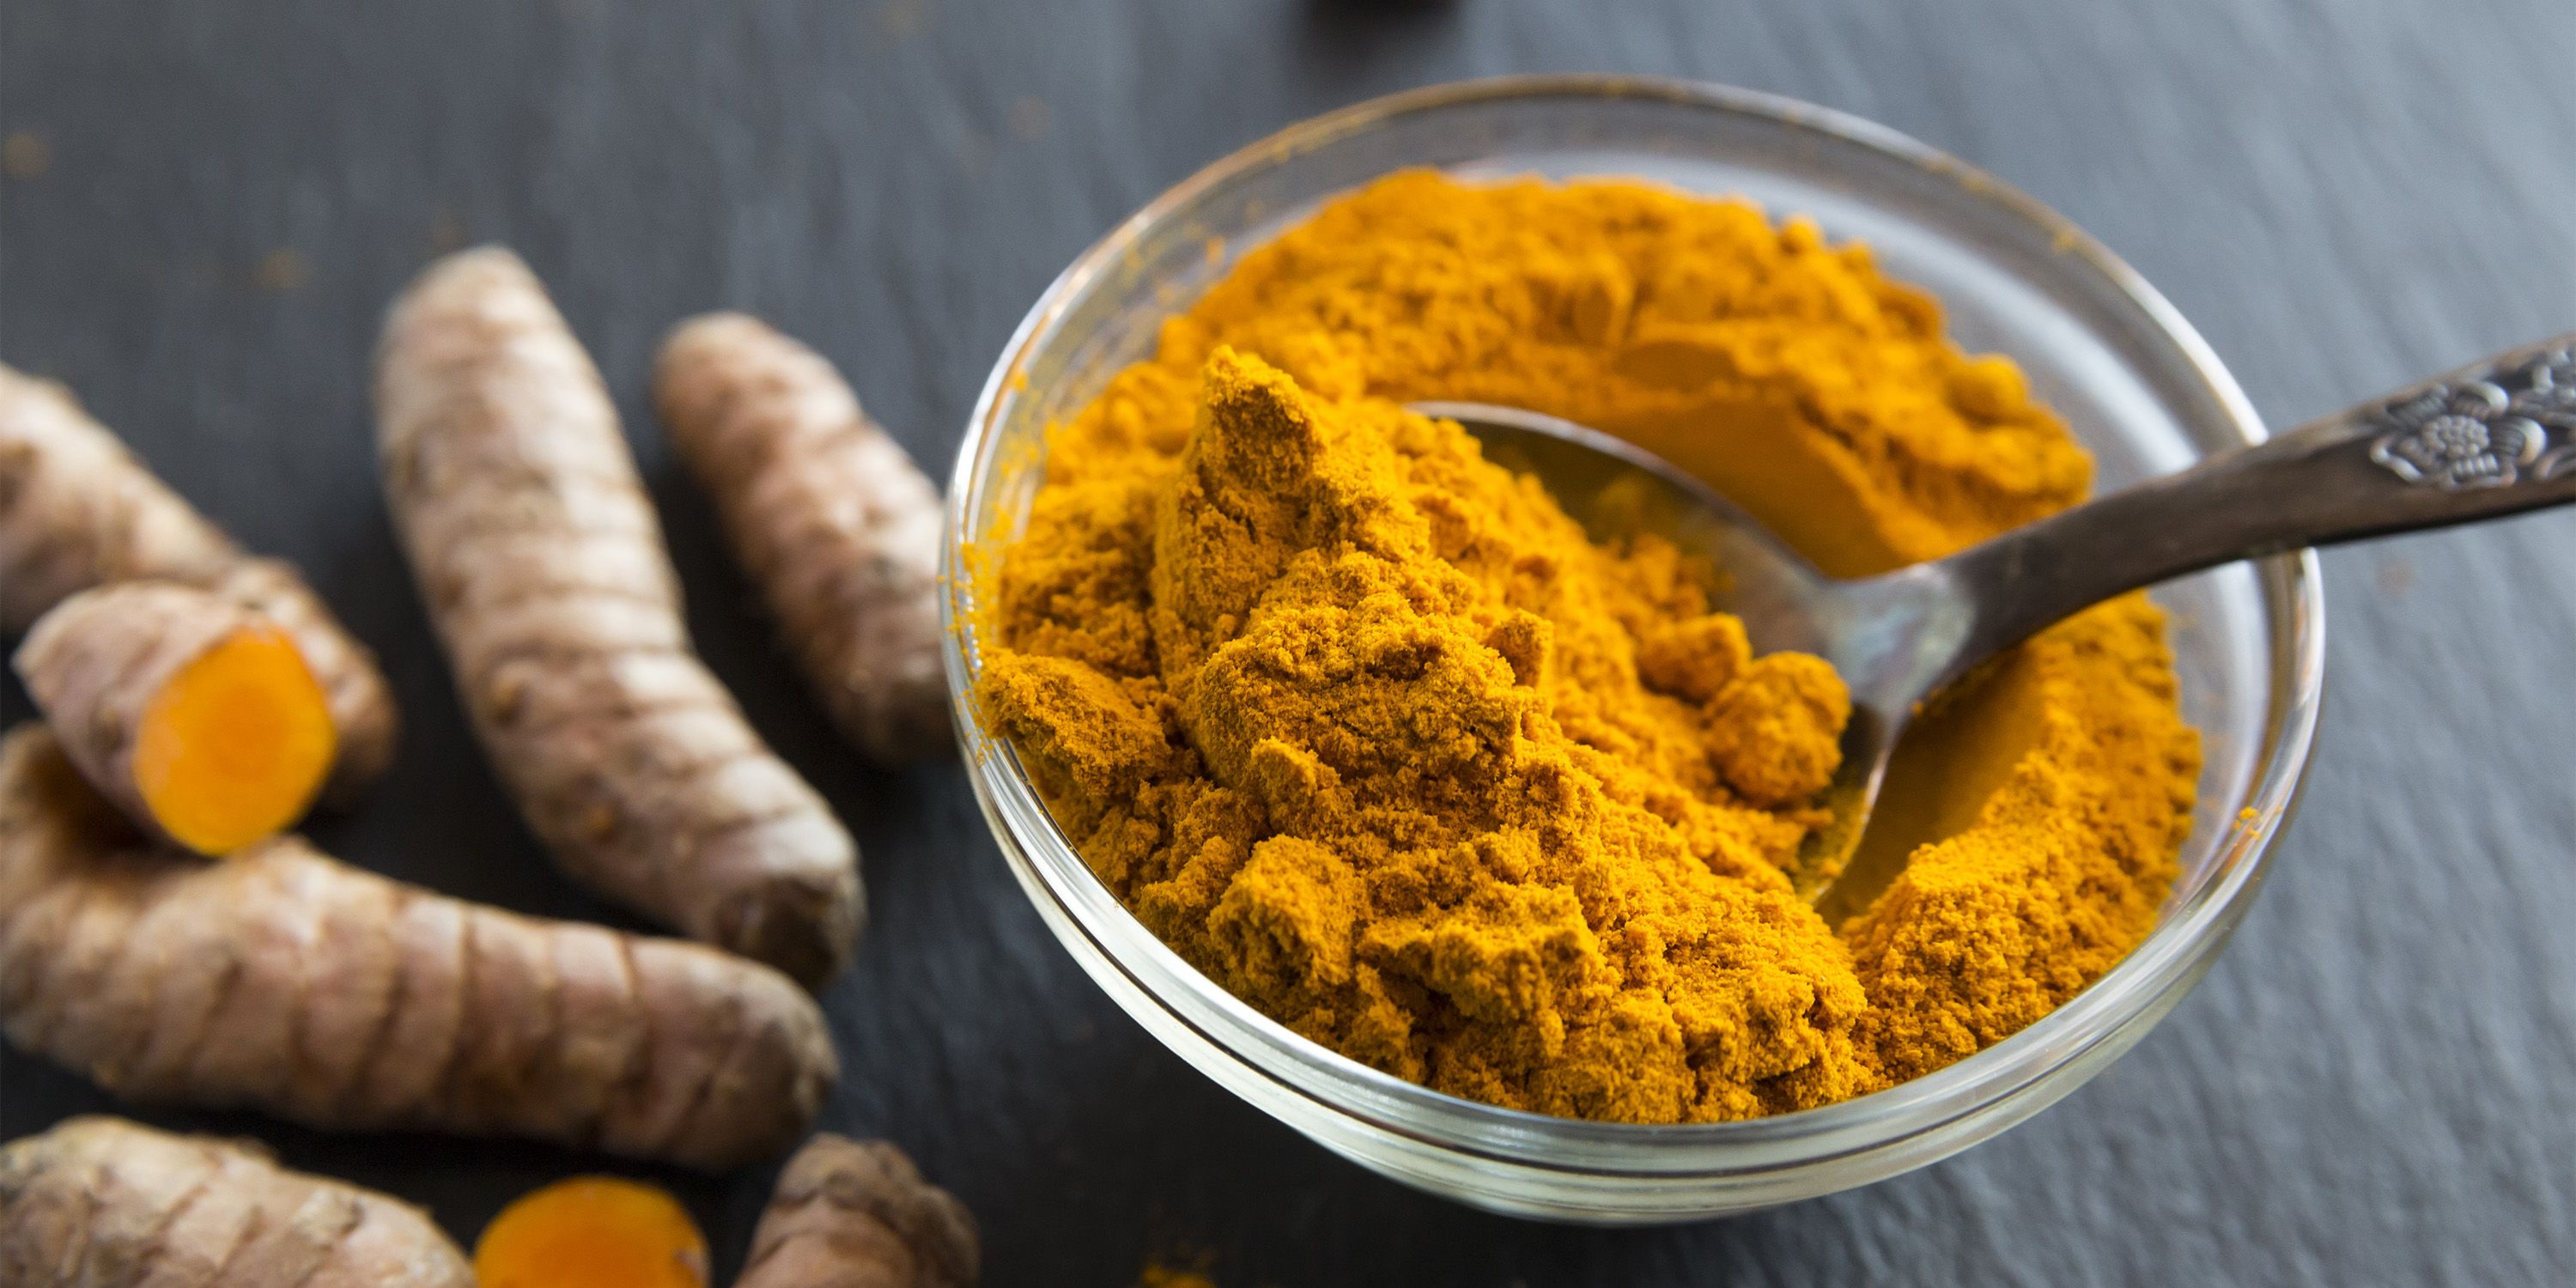 How to Make Your Own Brightening Turmeric Face Mask with Honey - DIY Turmeric Mask